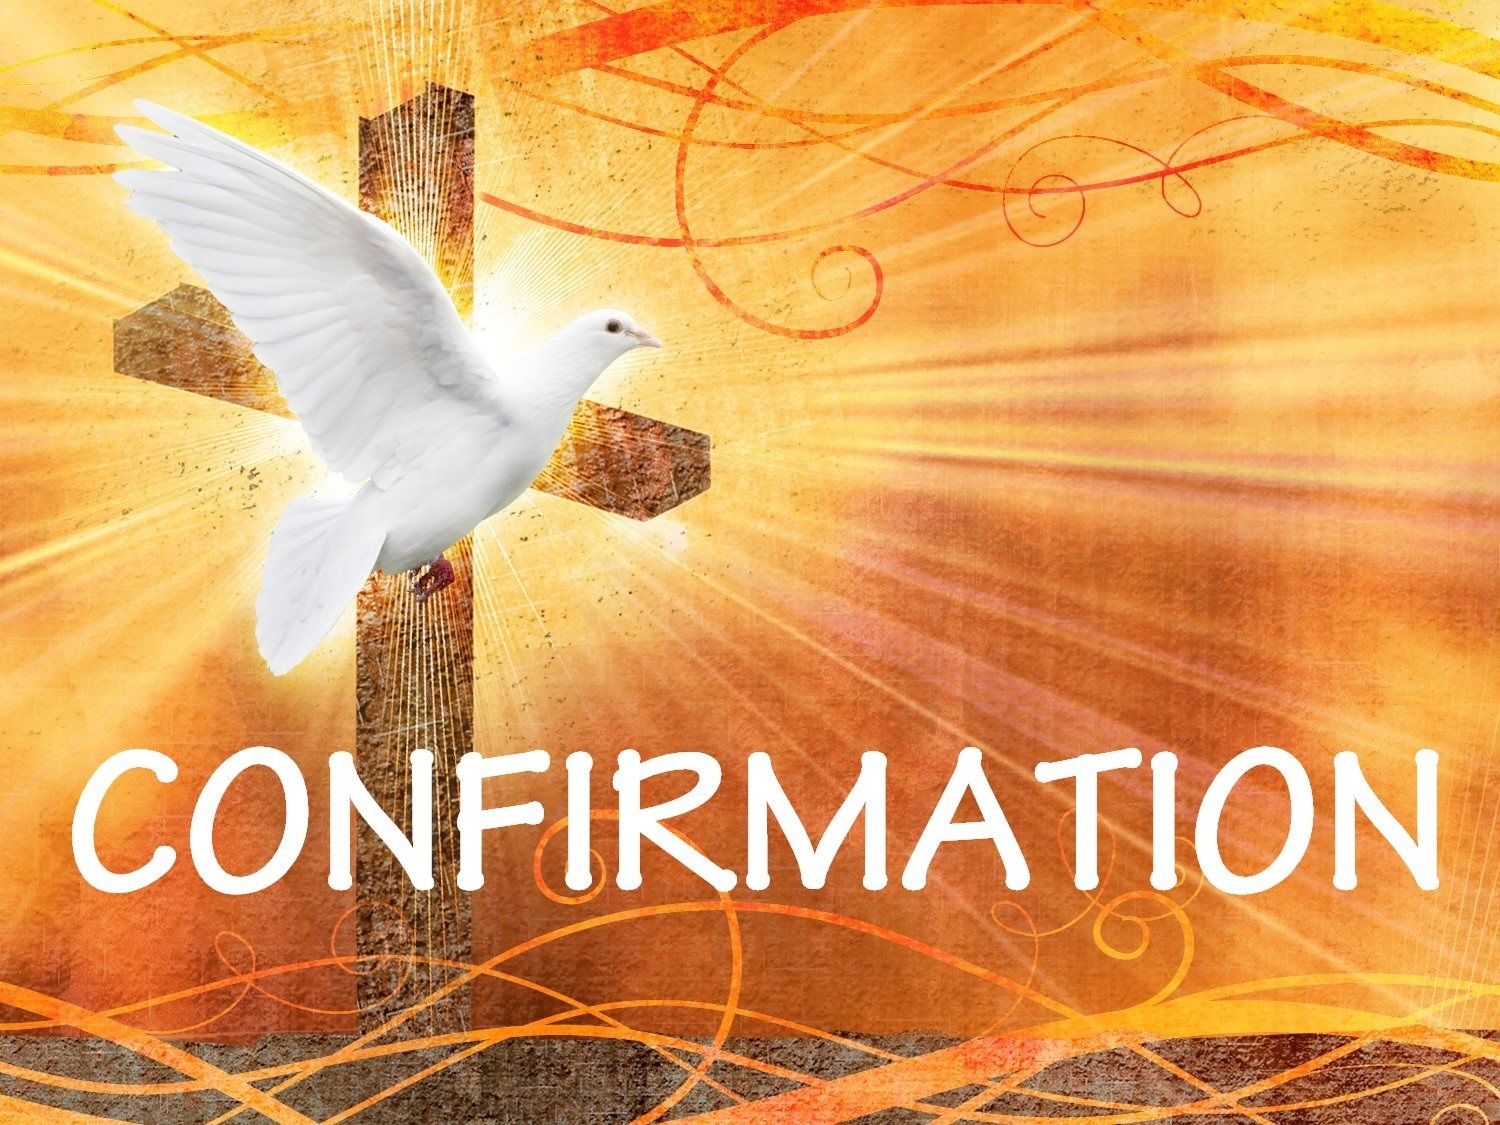 This image is used as a placeholder for information for our confirmation link